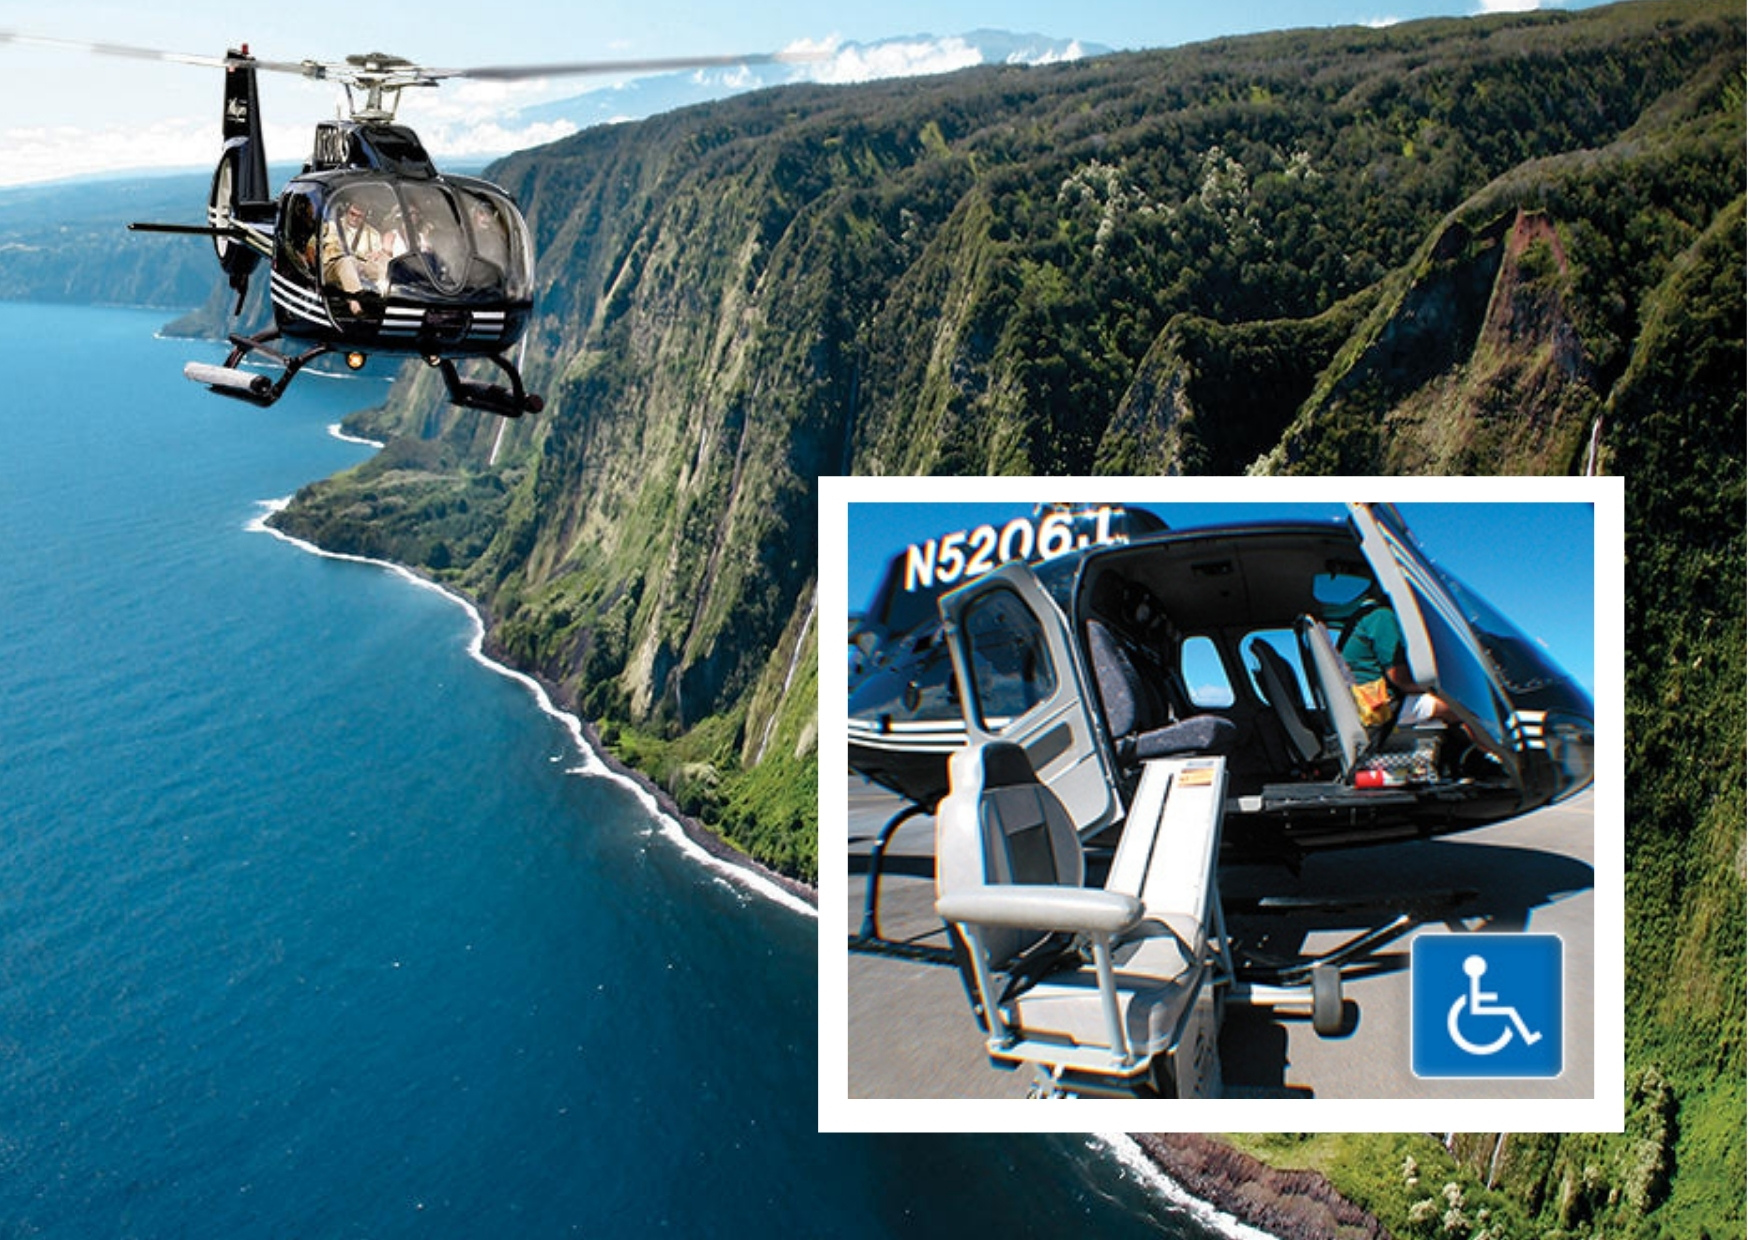 A black helicopter flying over the deep blue ocean and the luscious green Maui mountains. In the bottom right corner there is another photo showing the accessible chair lift that allows people with disabilities to get in the helicopter easier. 